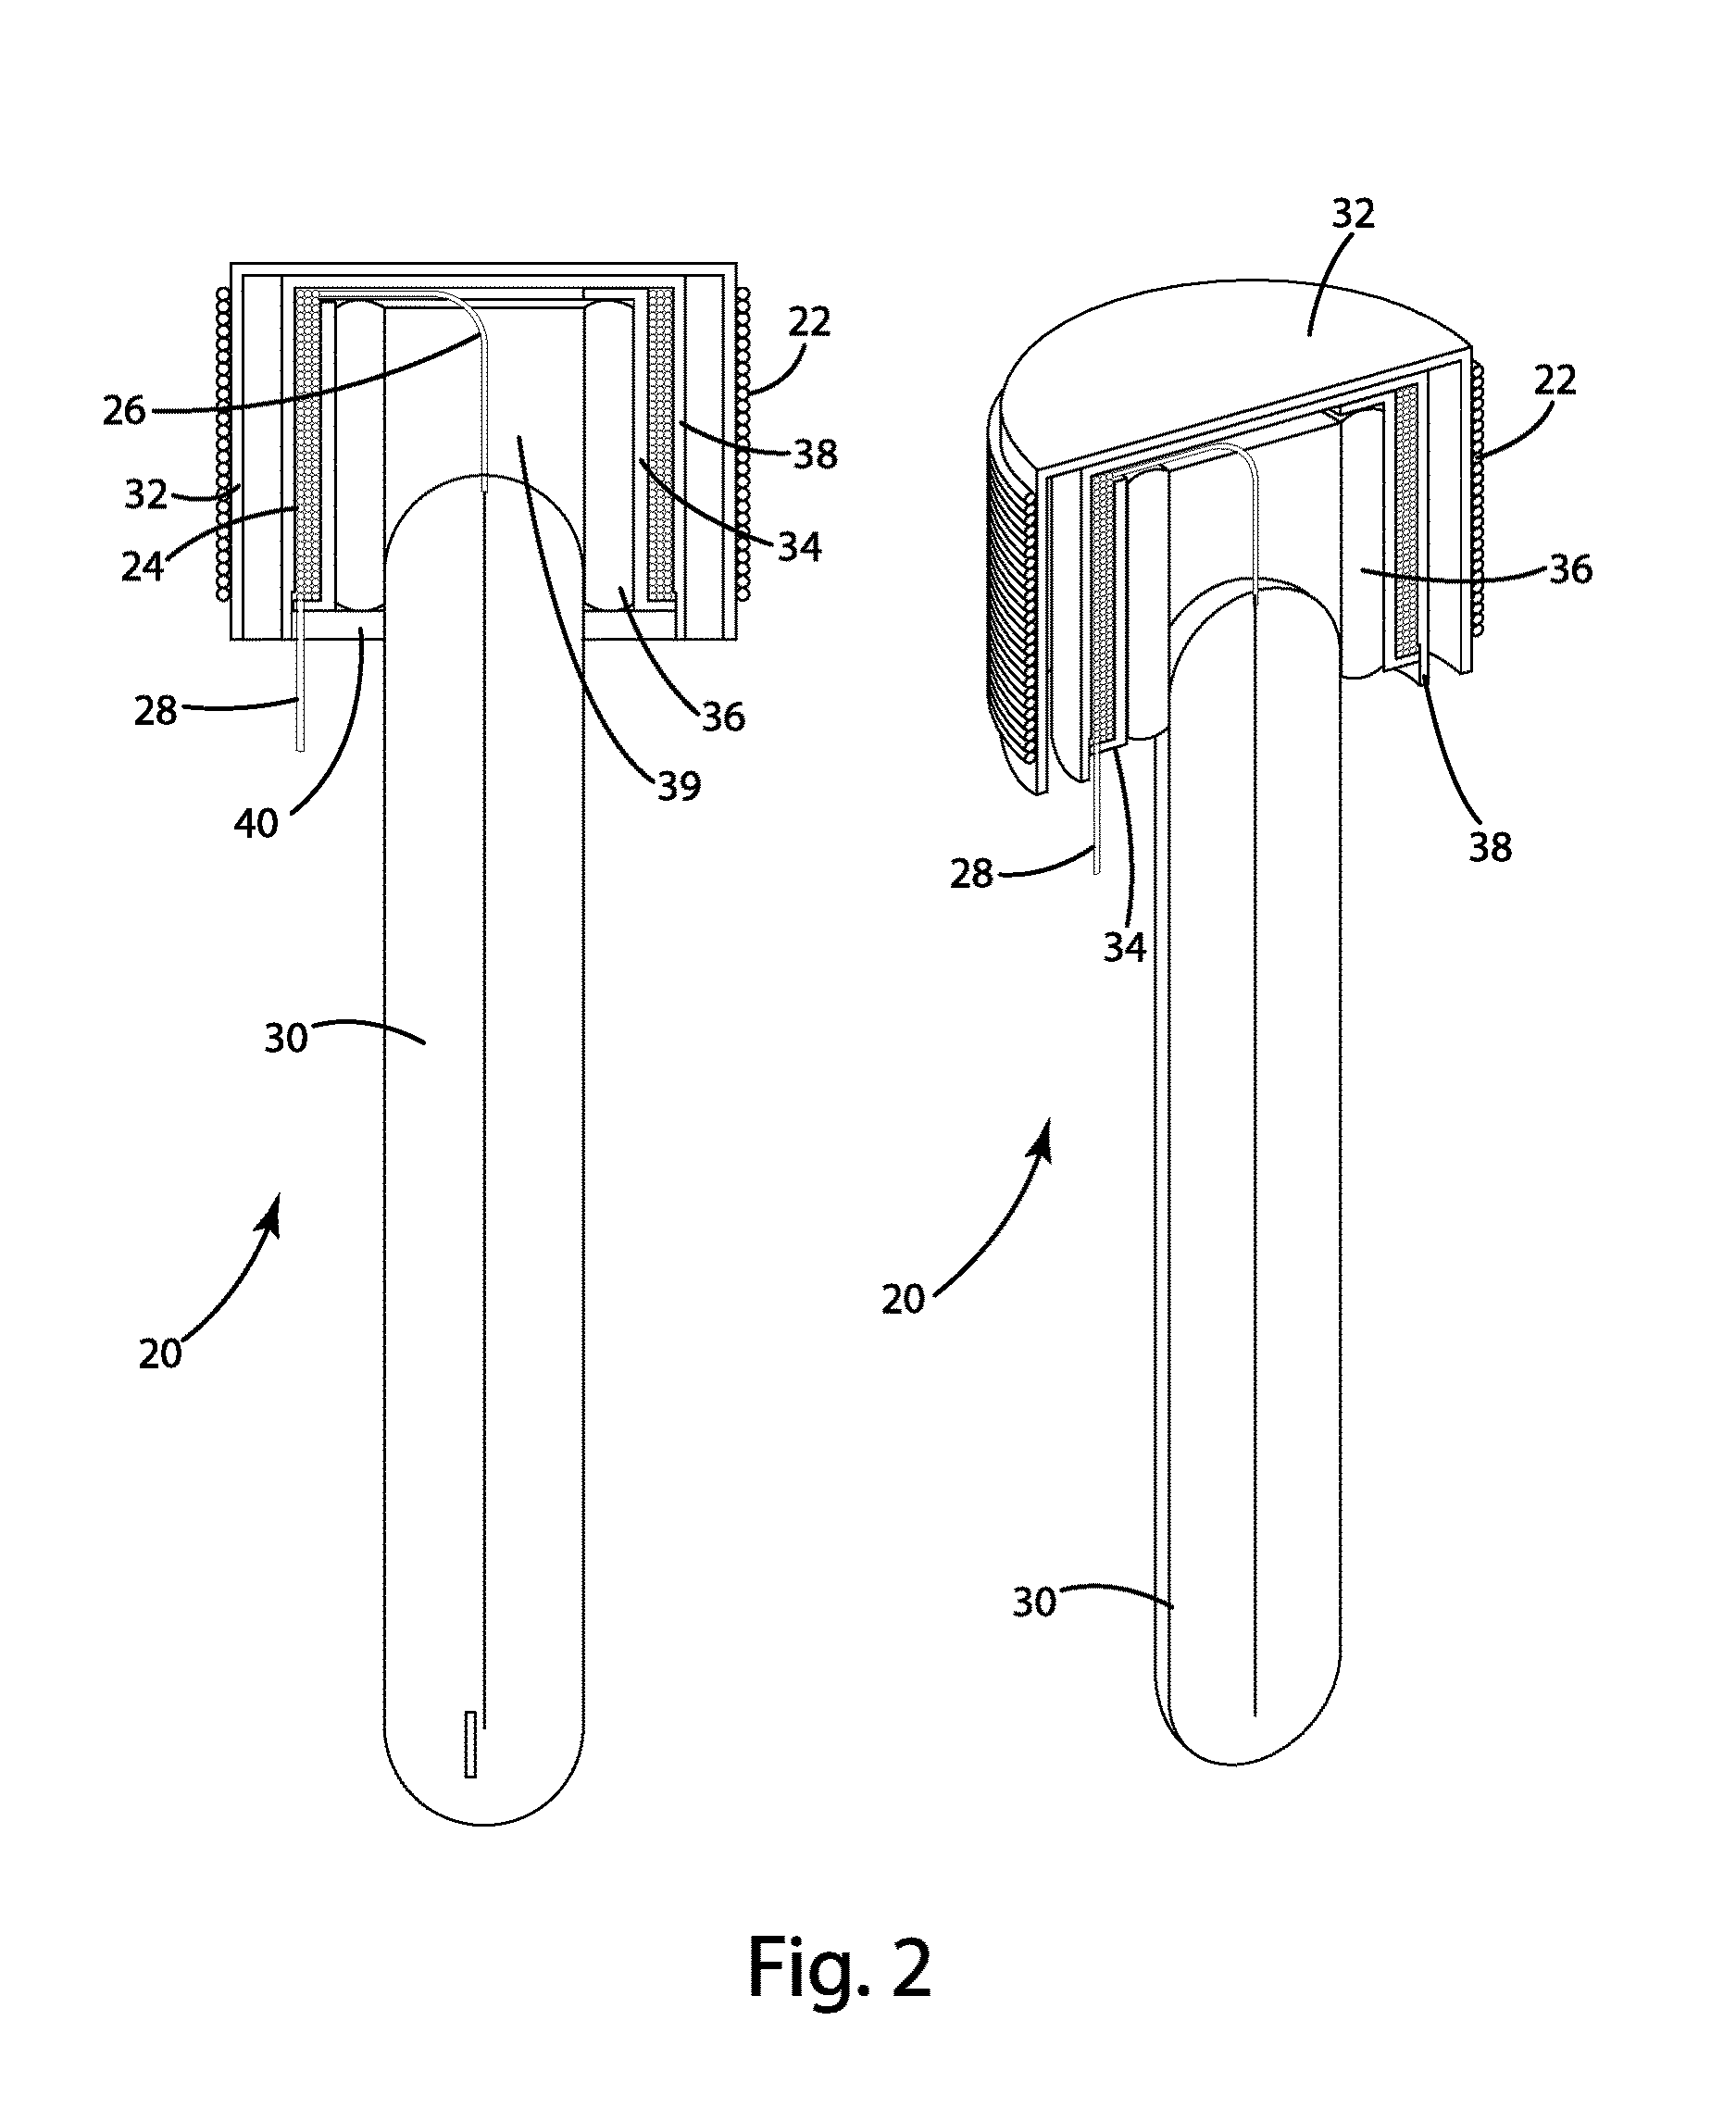 Inductively coupled dieletric barrier discharge lamp